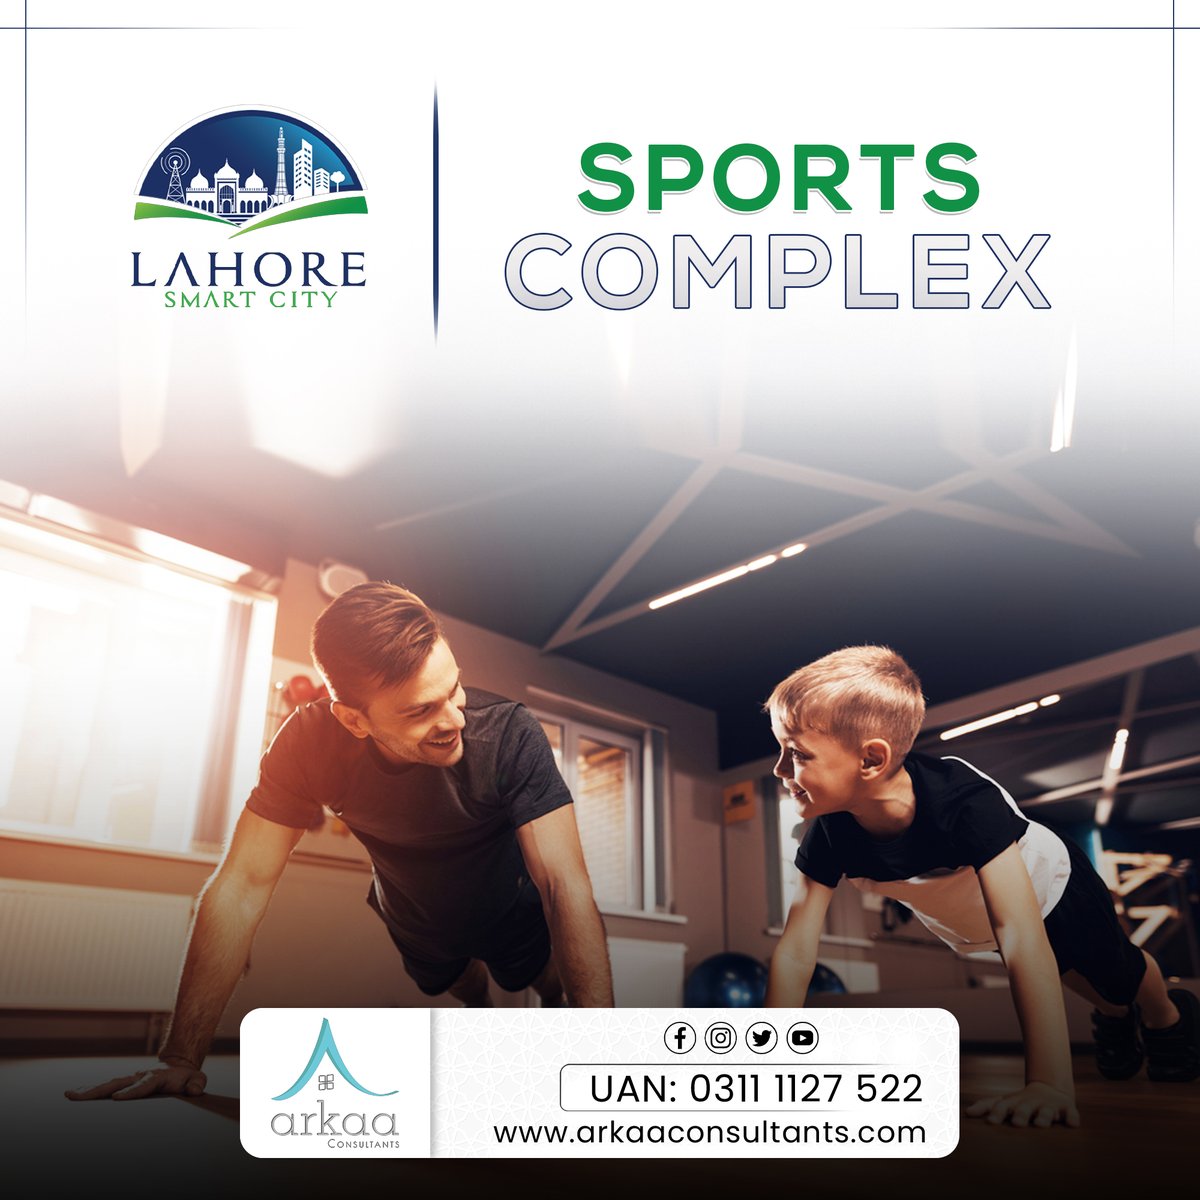 Lahore Smart City  offering indicative living facilities within a community 

#Arkaa #lahoresmartcity #arkaaconsultants #smartinterchange #SmartCities #lscresidential #StayTuned #nextbigthing #lsc #lahore   #Progressivesociety #SportsComplex #HealthMattersMost #stayfitandhealthy